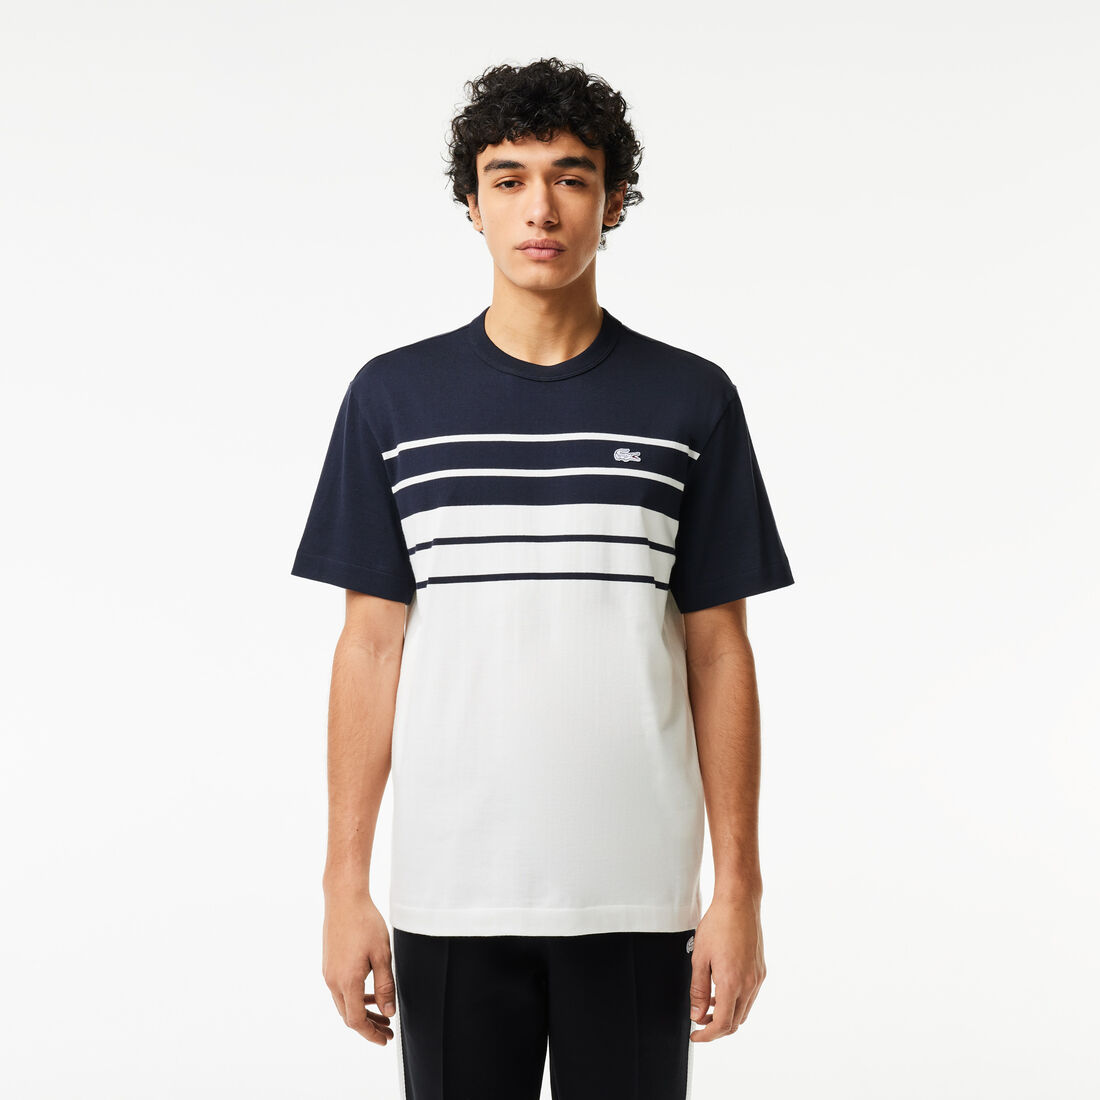 French Made Striped Jersey T-shirt - TH8130-00-GA3